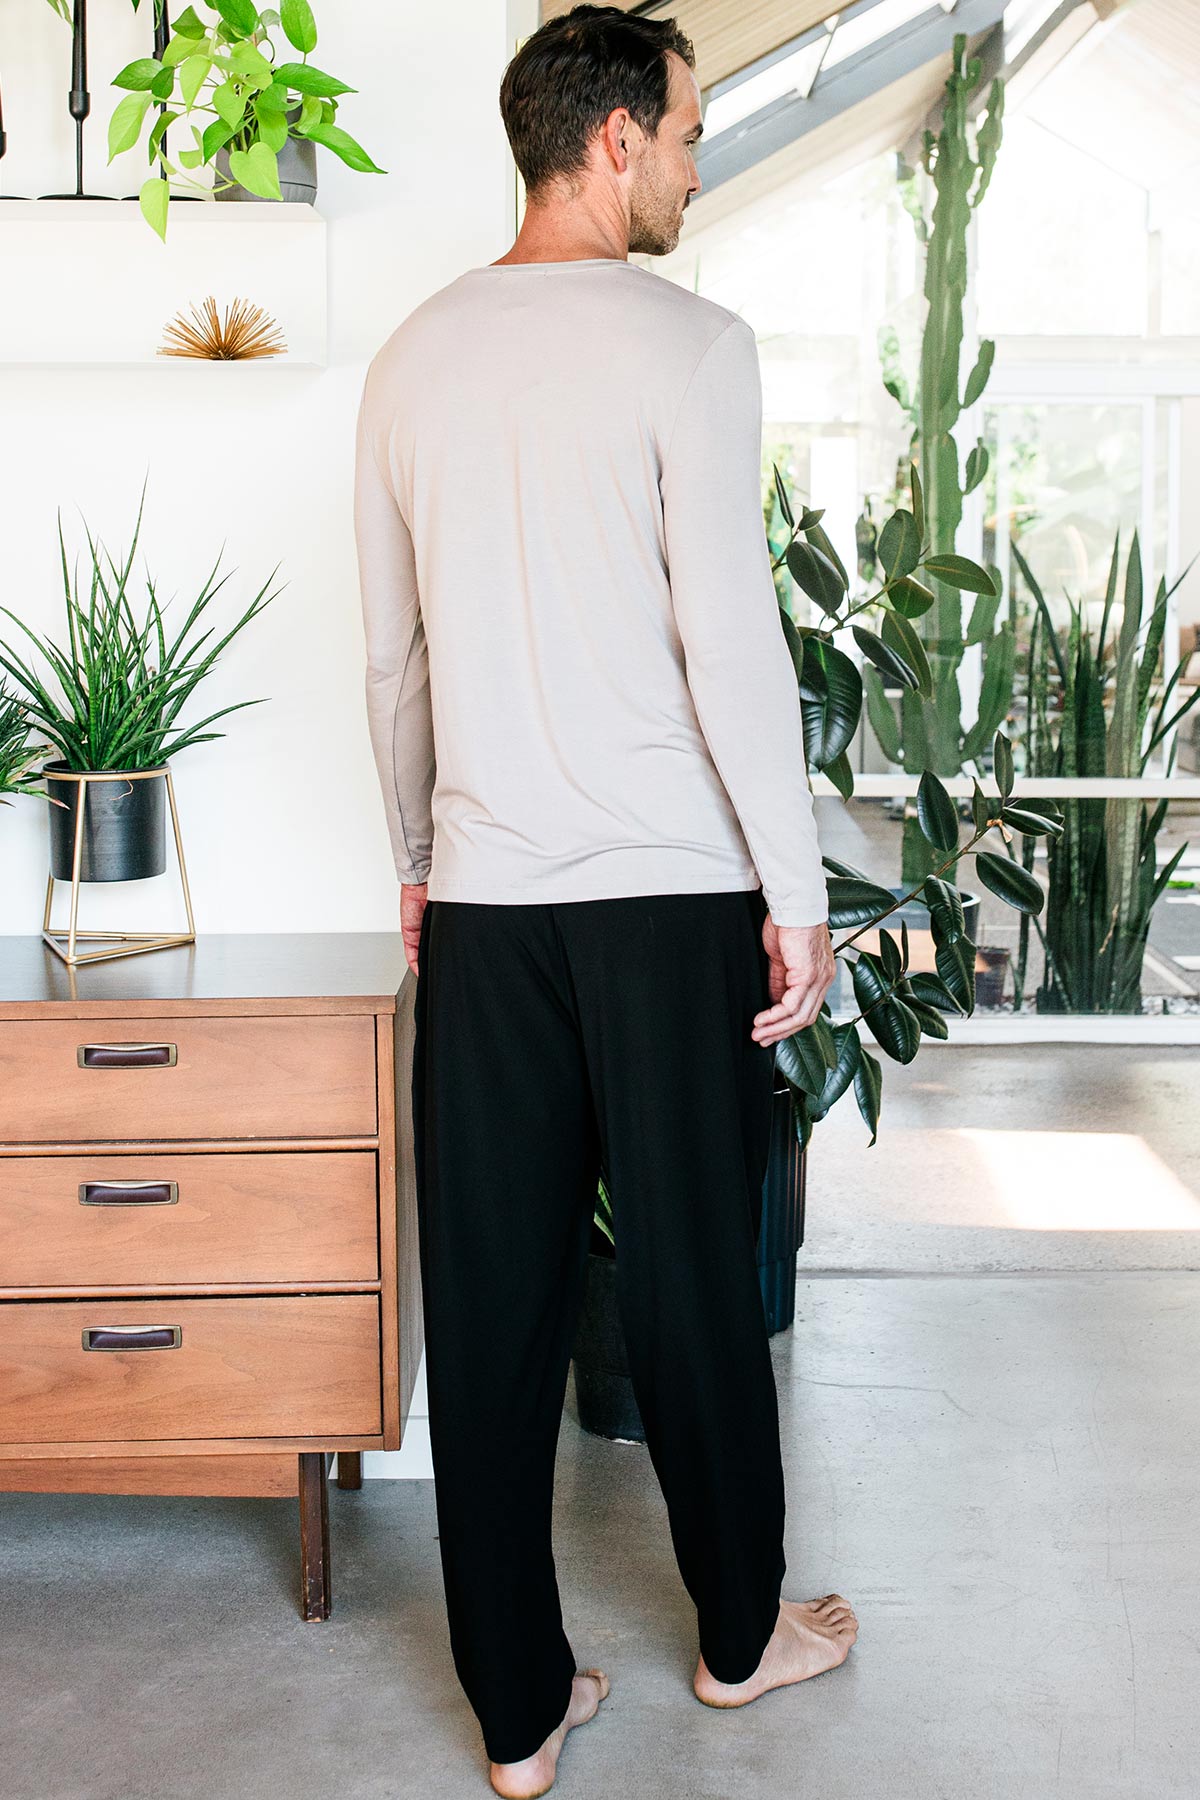 A man standing with his back towards the camera, wearing Yala Men's Hayden ButterSoft Bamboo Lounge Pants in Black